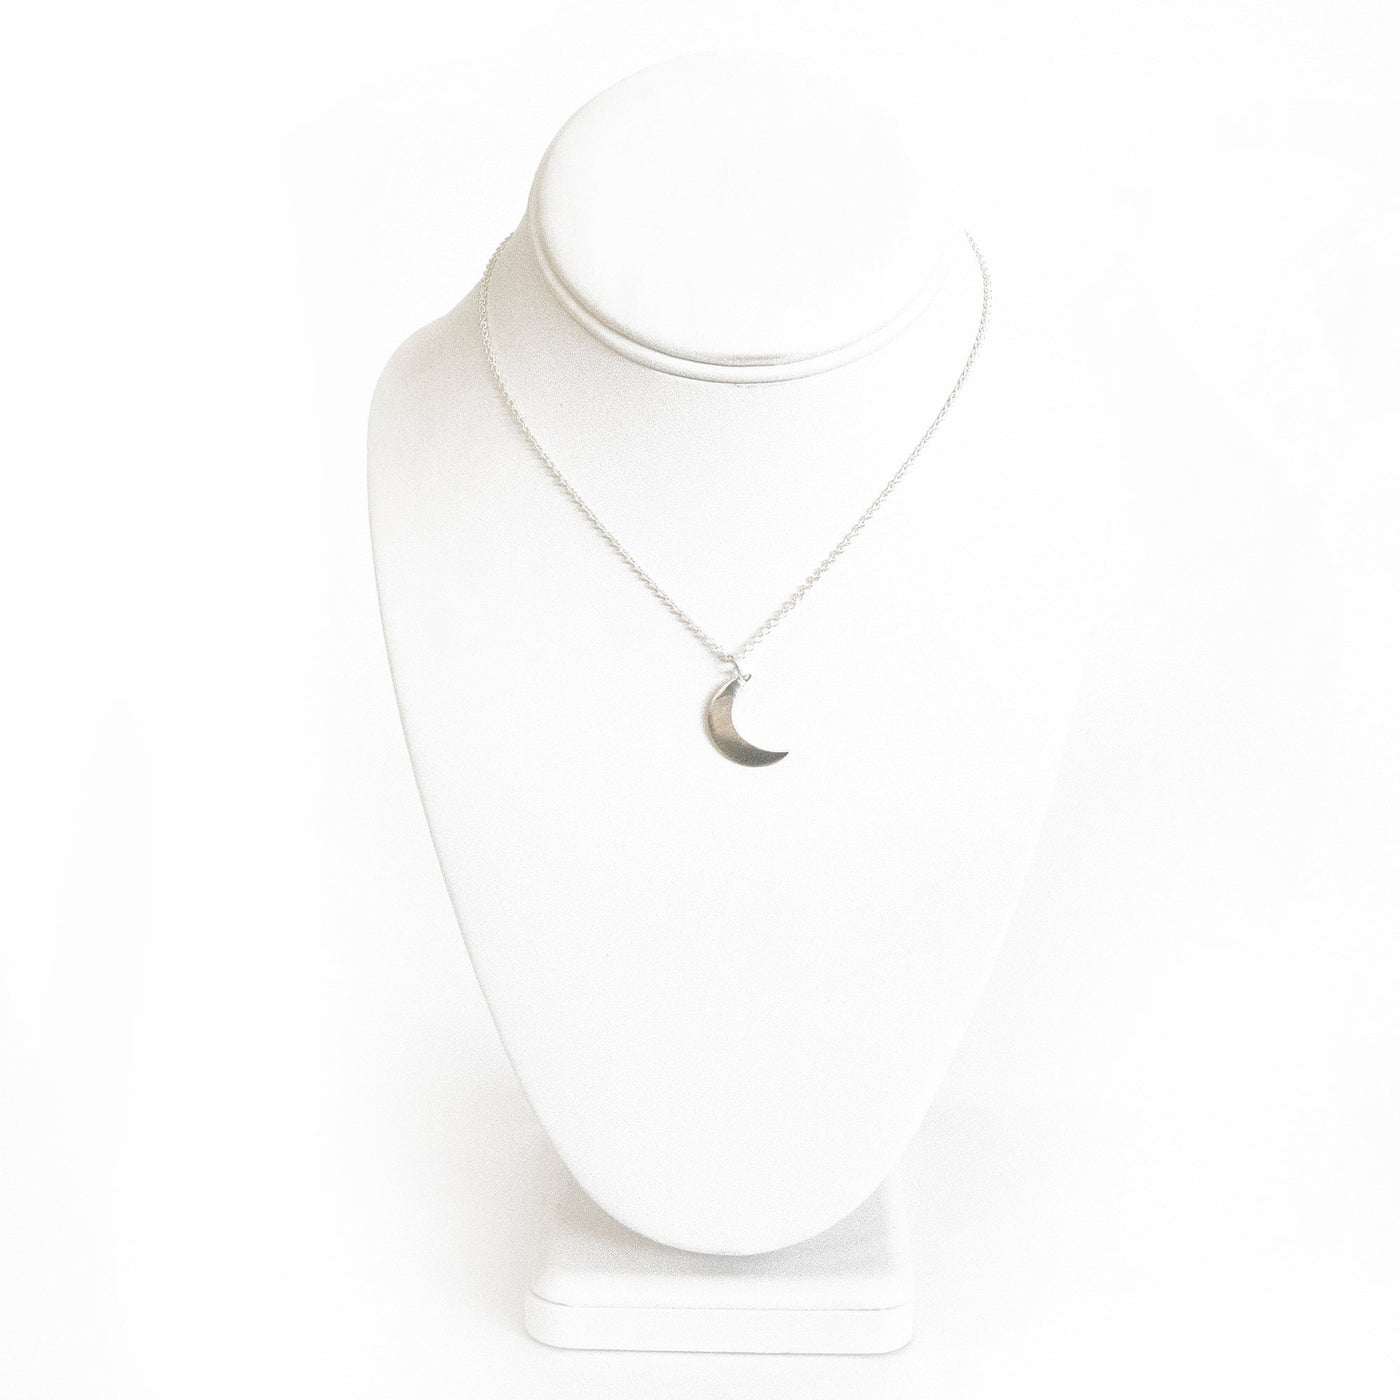 Silverpolished Crescent Moon Necklace